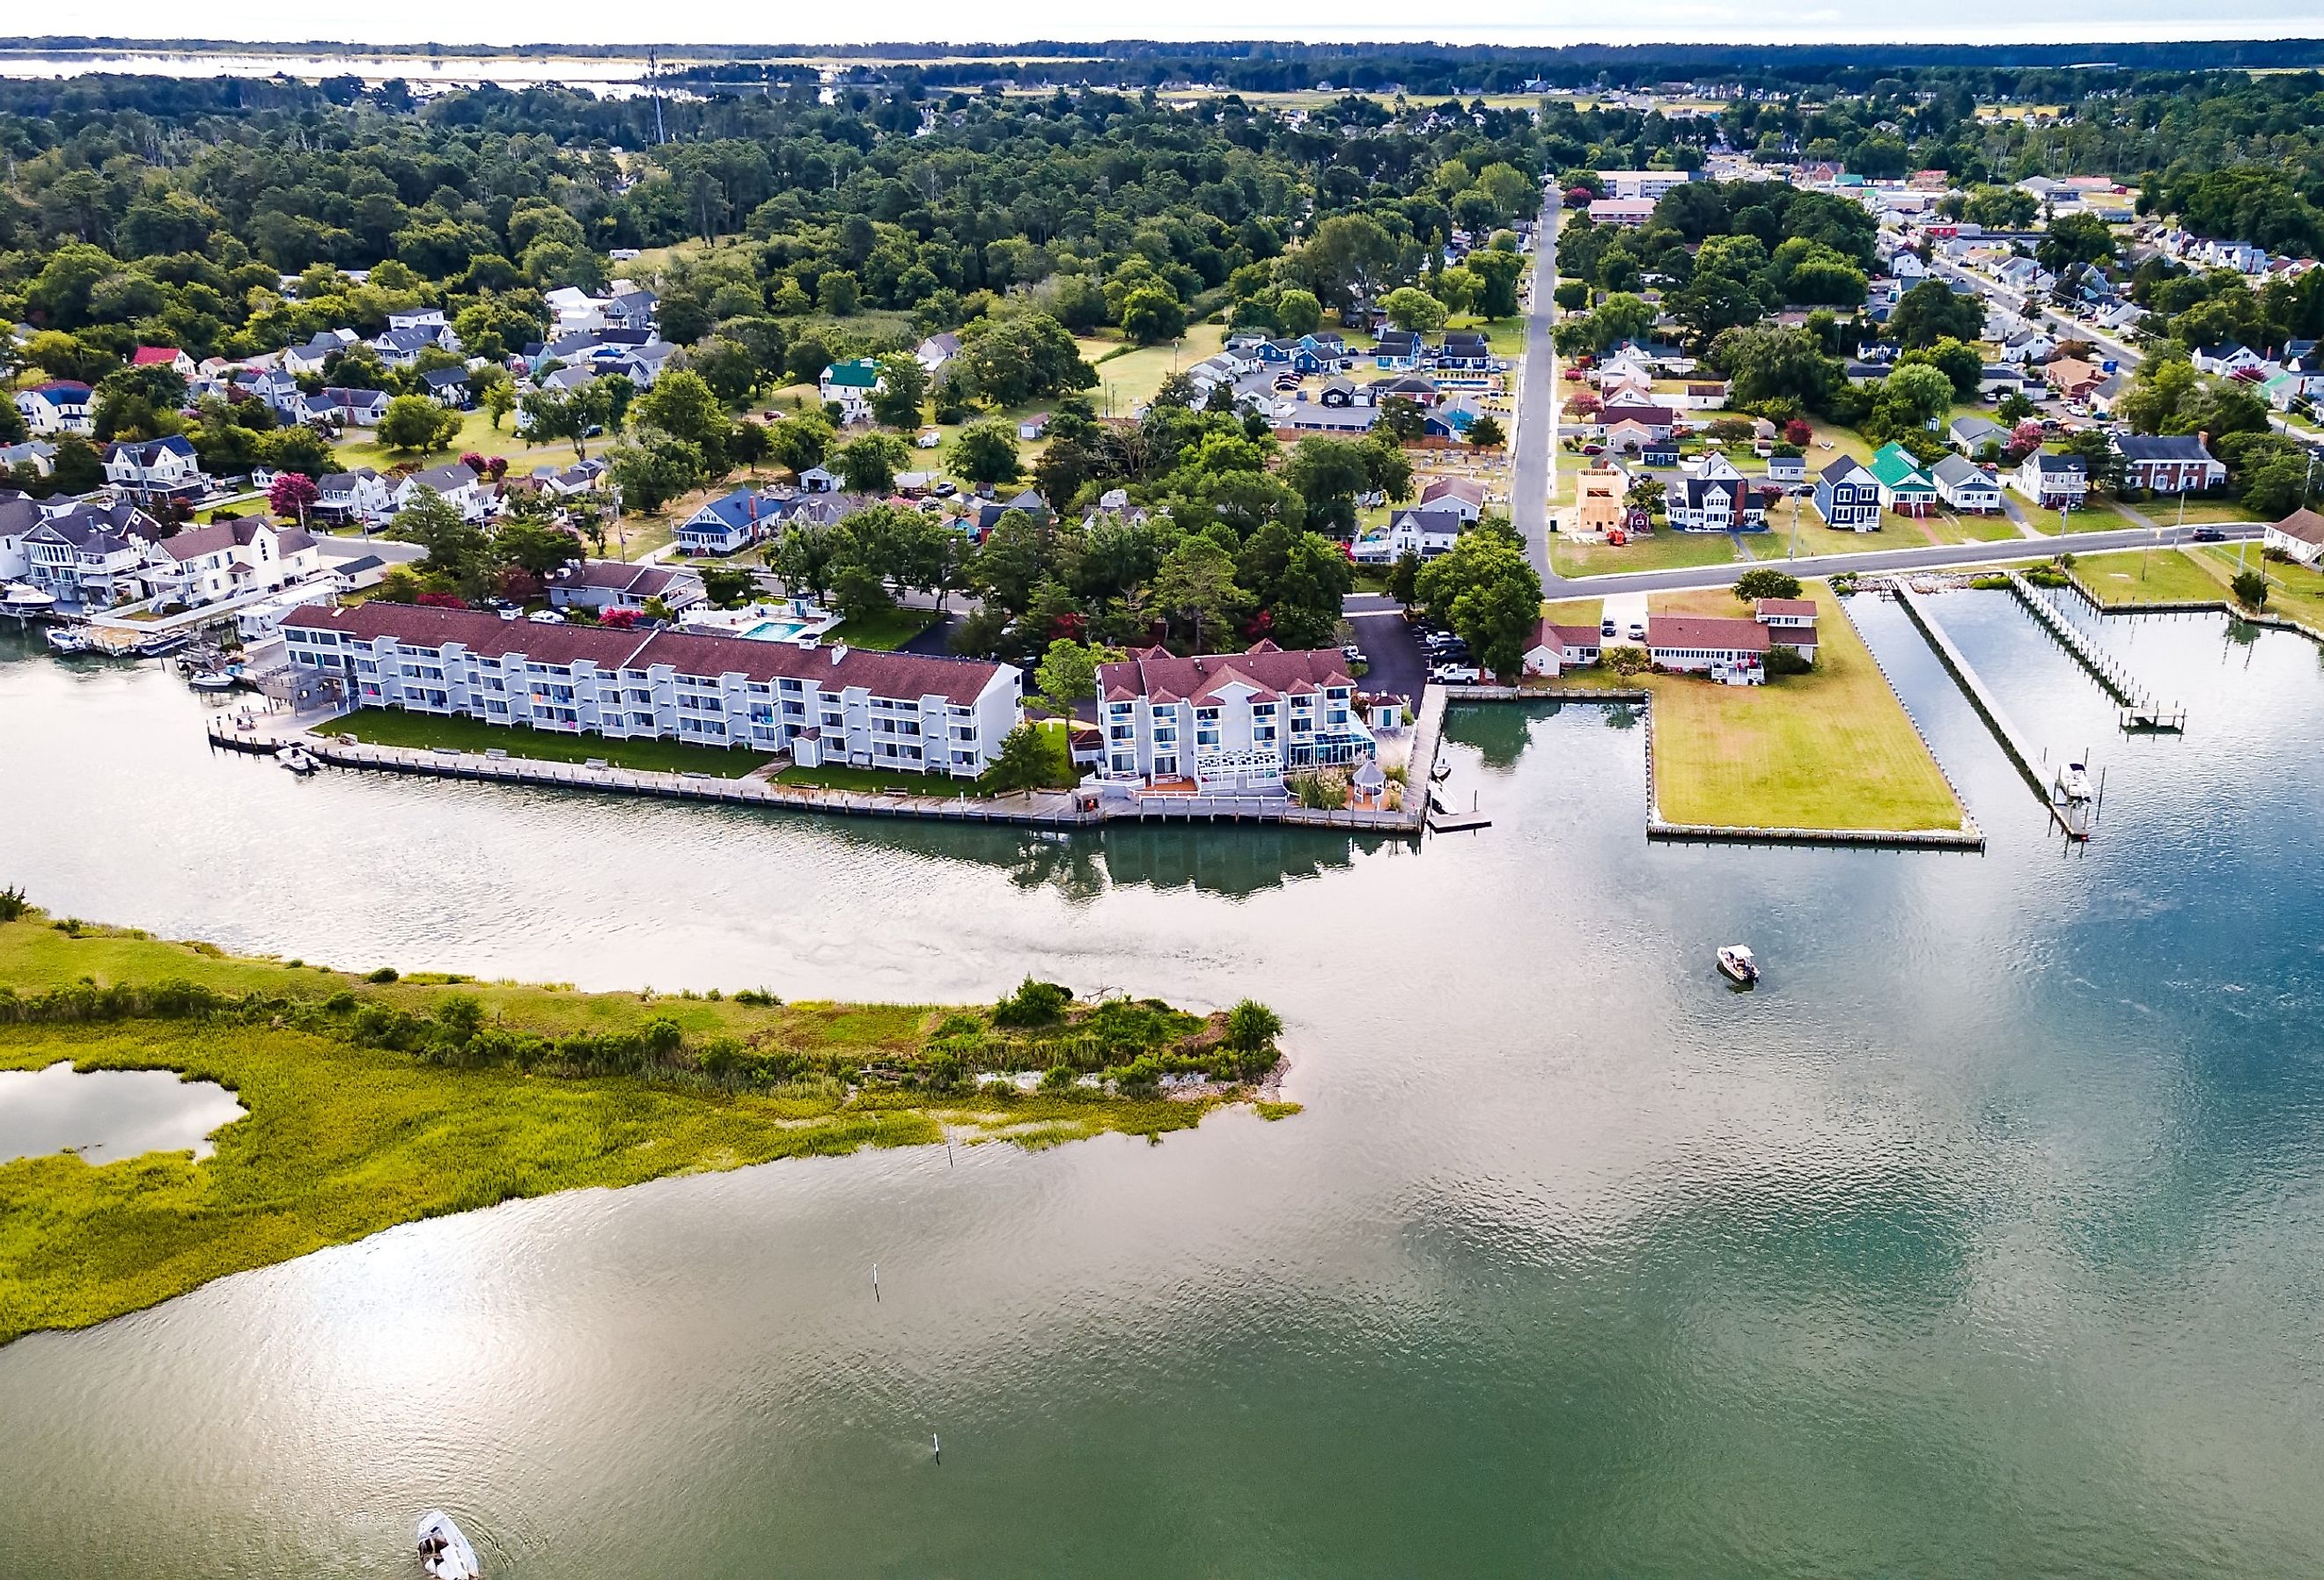 Chincoteague Island, marinas, houses and motels with parking lots.